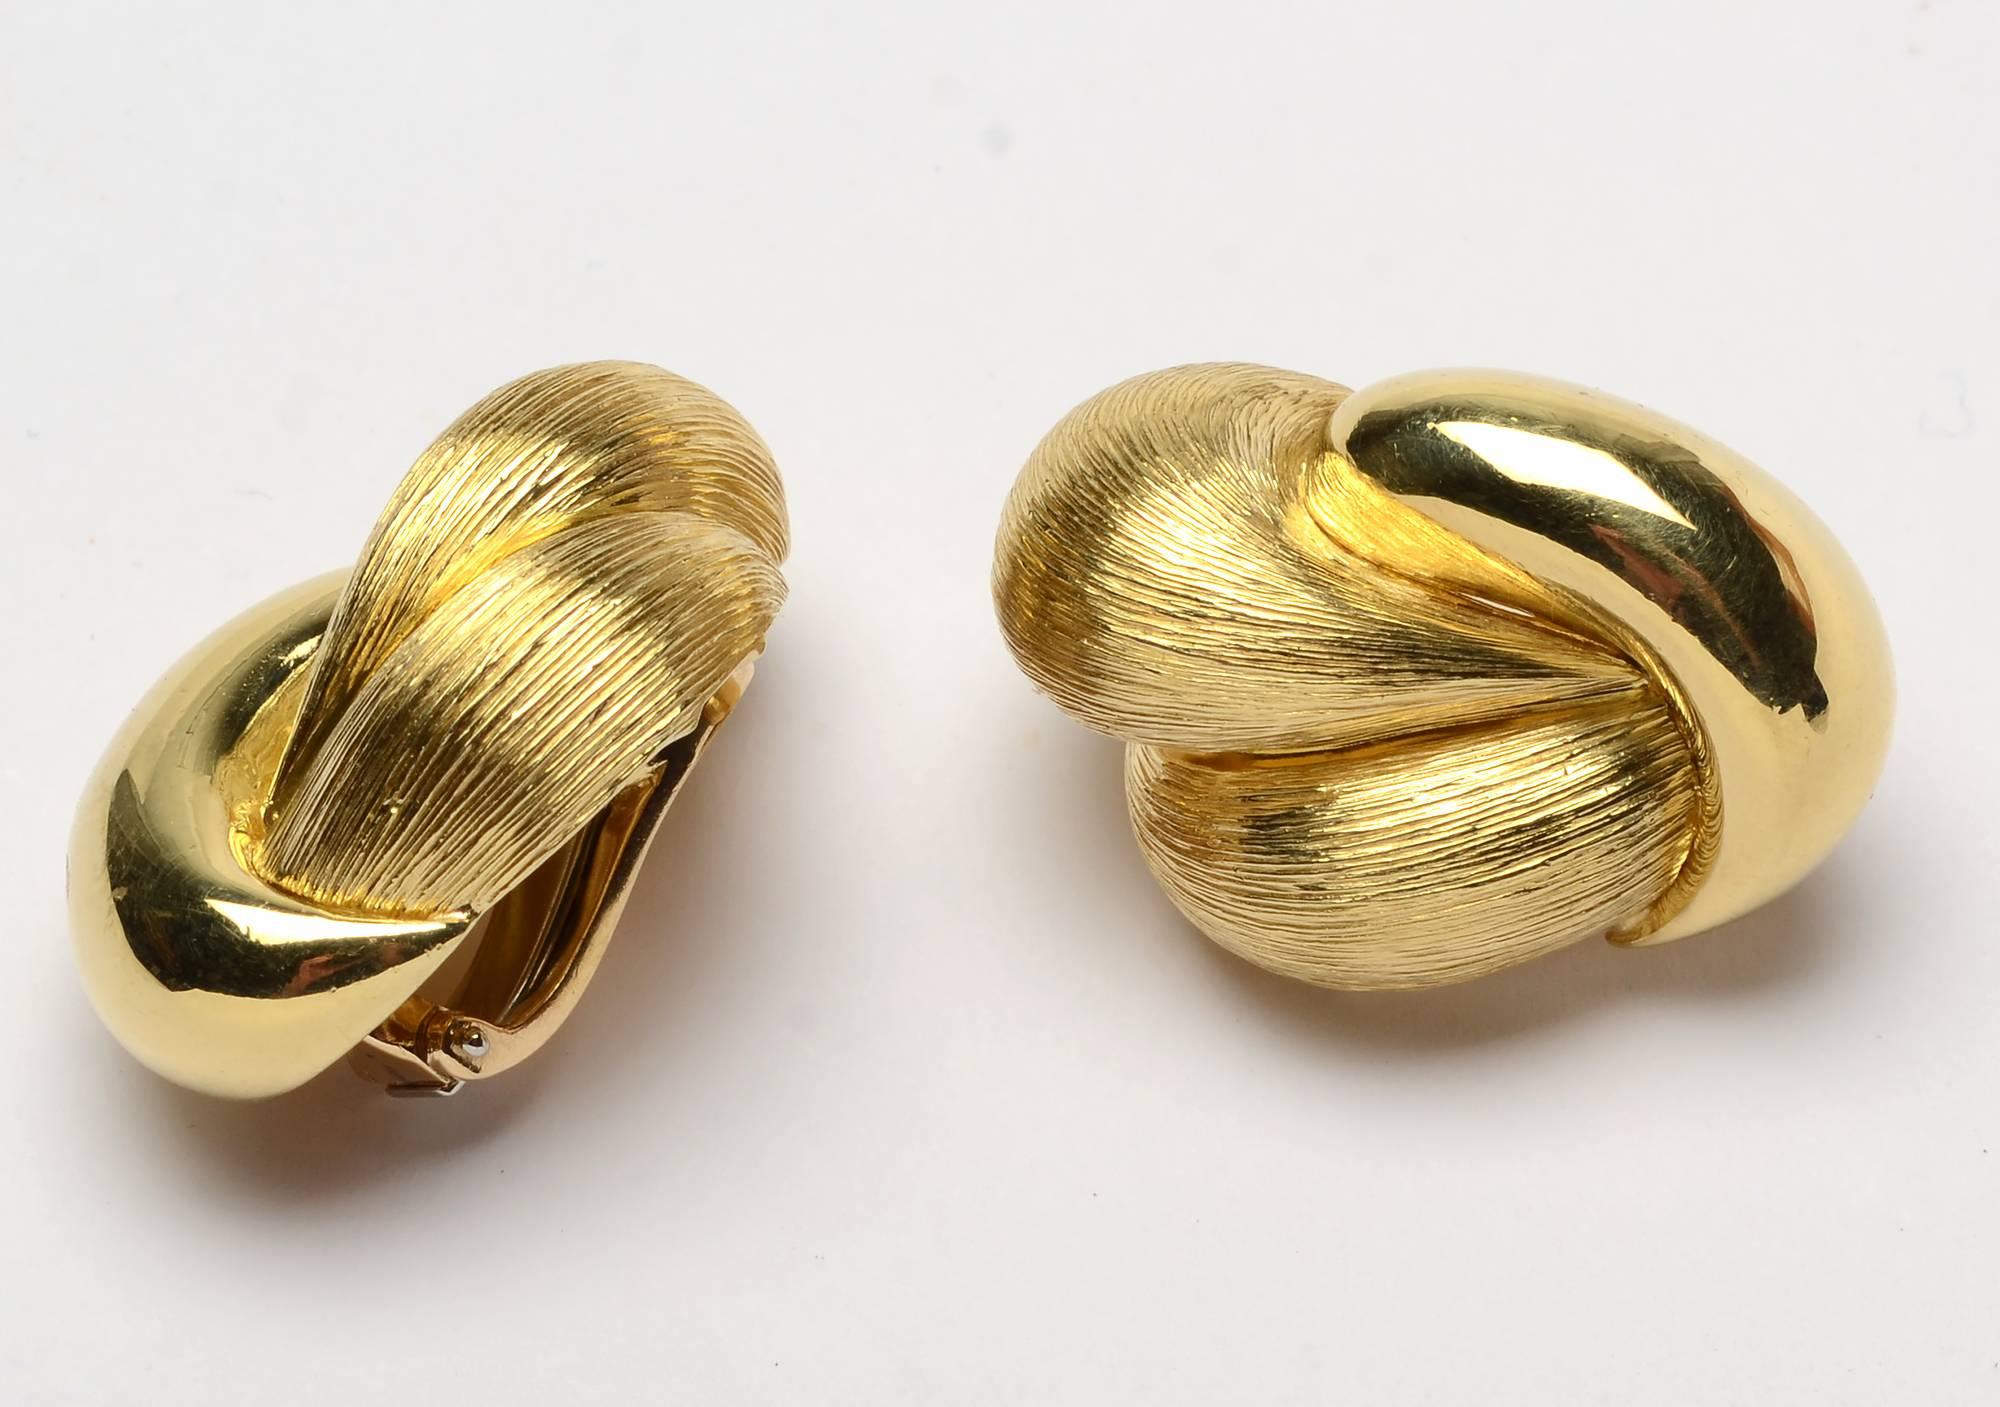 These voluptuous lobed earrings by Henry Dunay are made with both his brushed Sabi finish as well as a high gloss. Clip backs can be converted to posts. The earrings measure 1 1/4